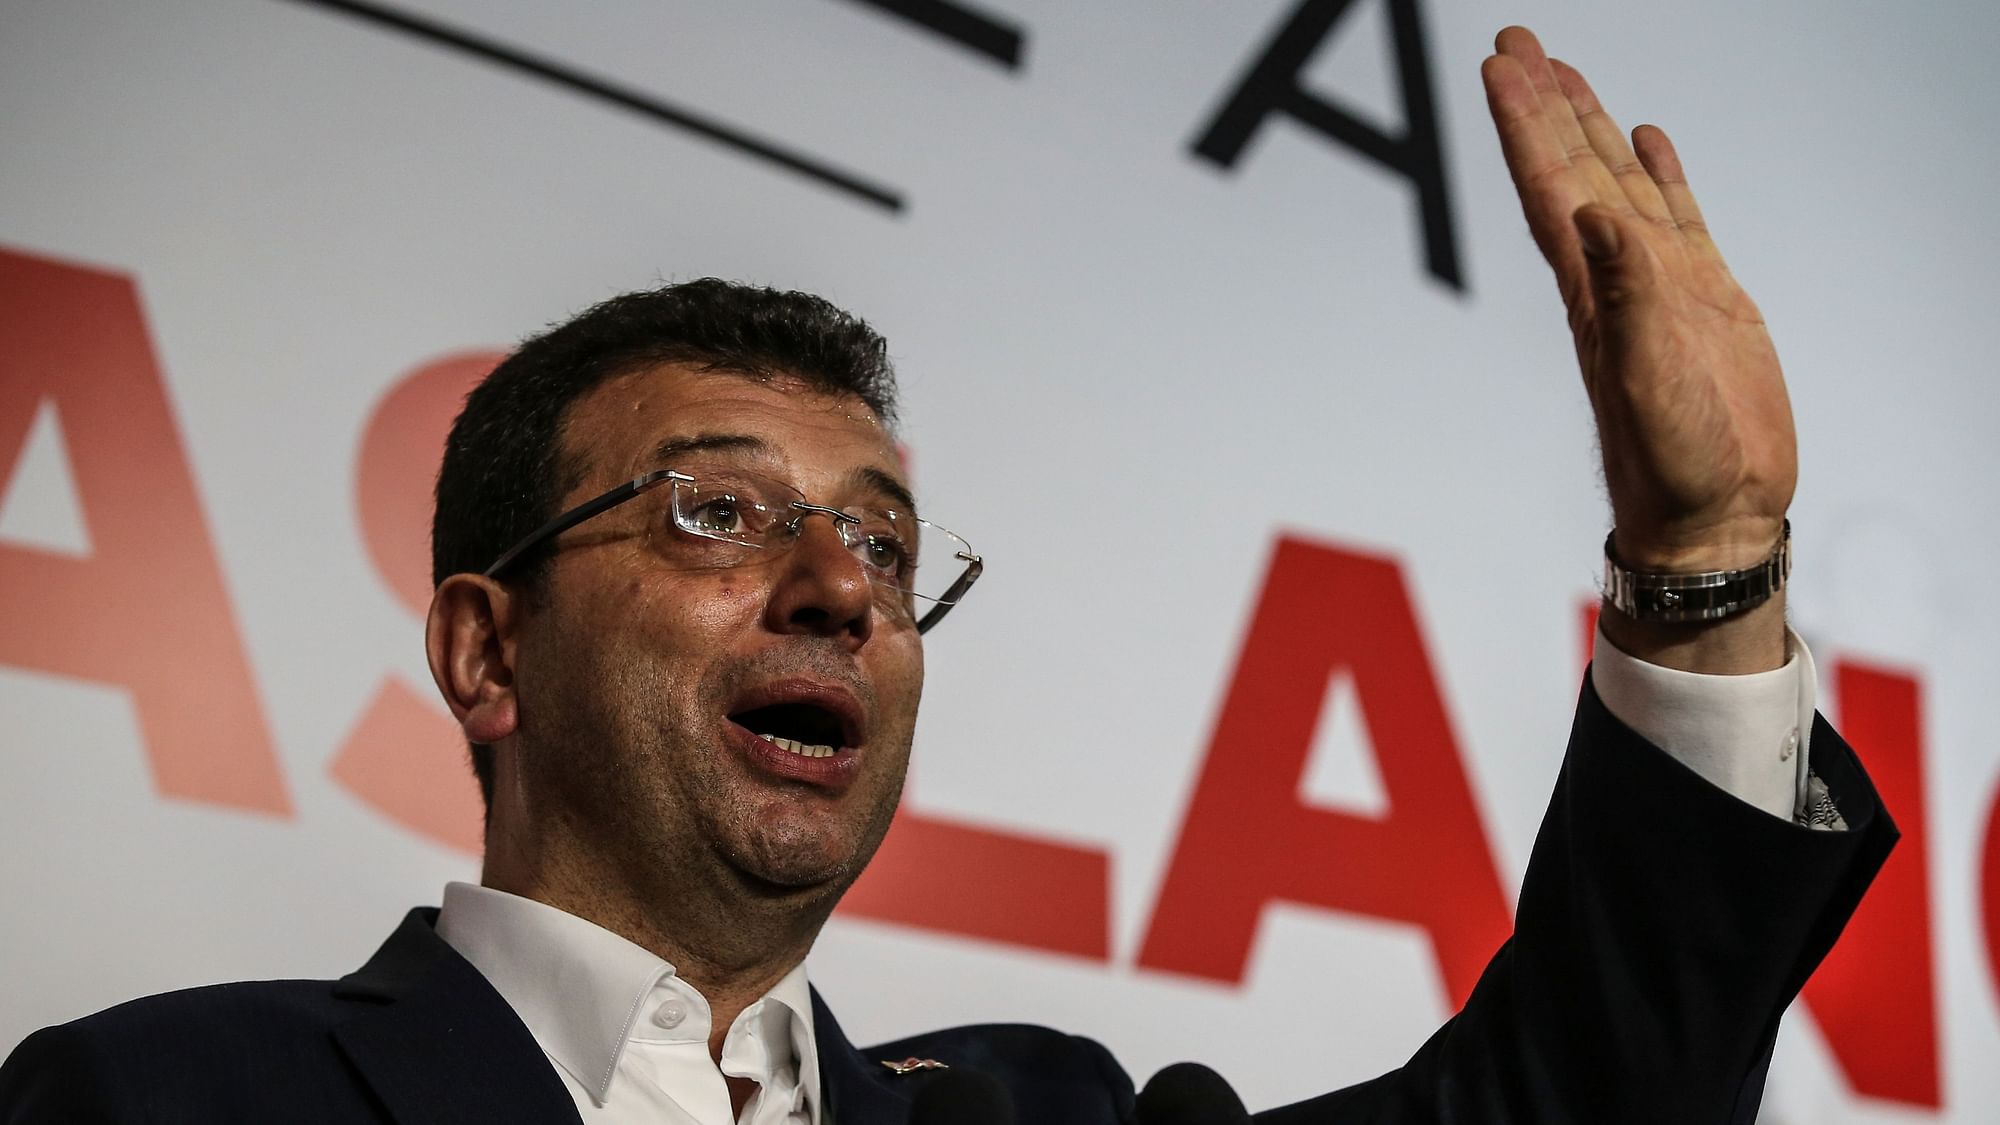 Ekrem Imamoglu, the candidate from an alliance led by the secular Republican People’s Party, (CHP) gestures as he declares victory during a news conference.&nbsp;